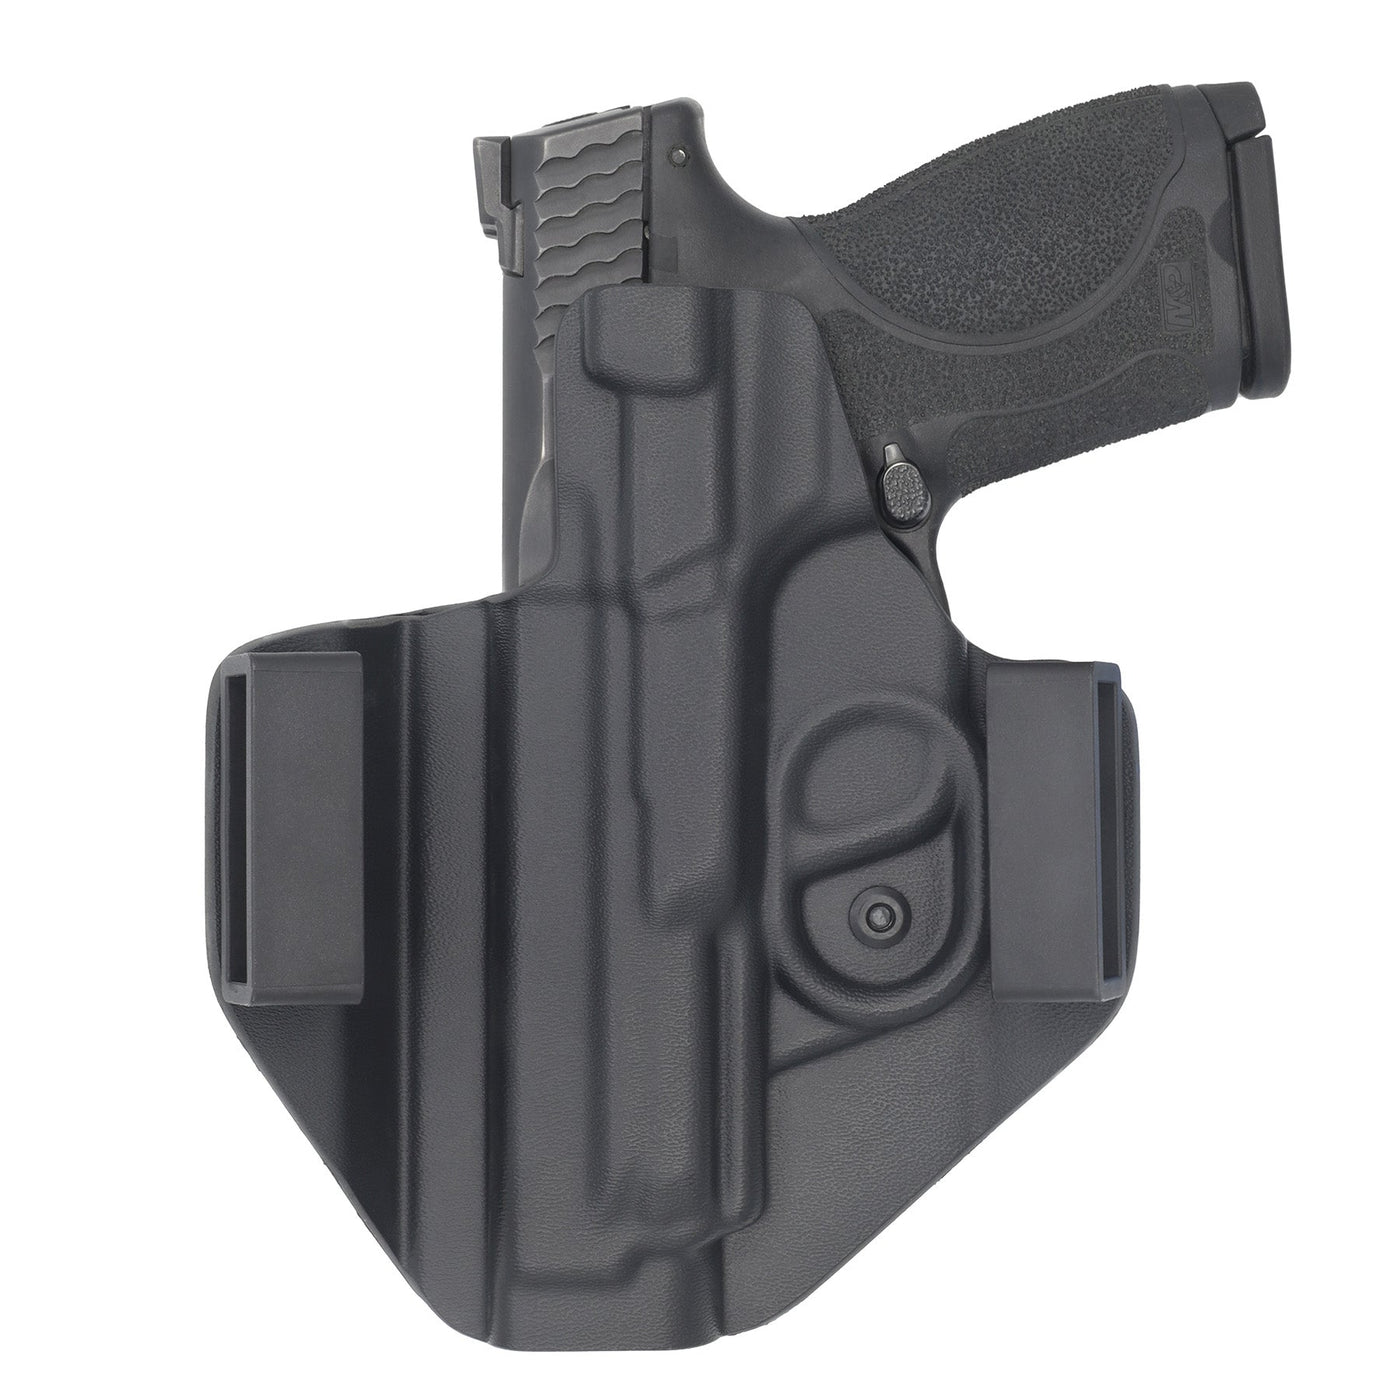 C&G Holsters custom Covert OWB kydex holster for Smith & Wesson M&P 2.0 9/40 in holstered position rear view